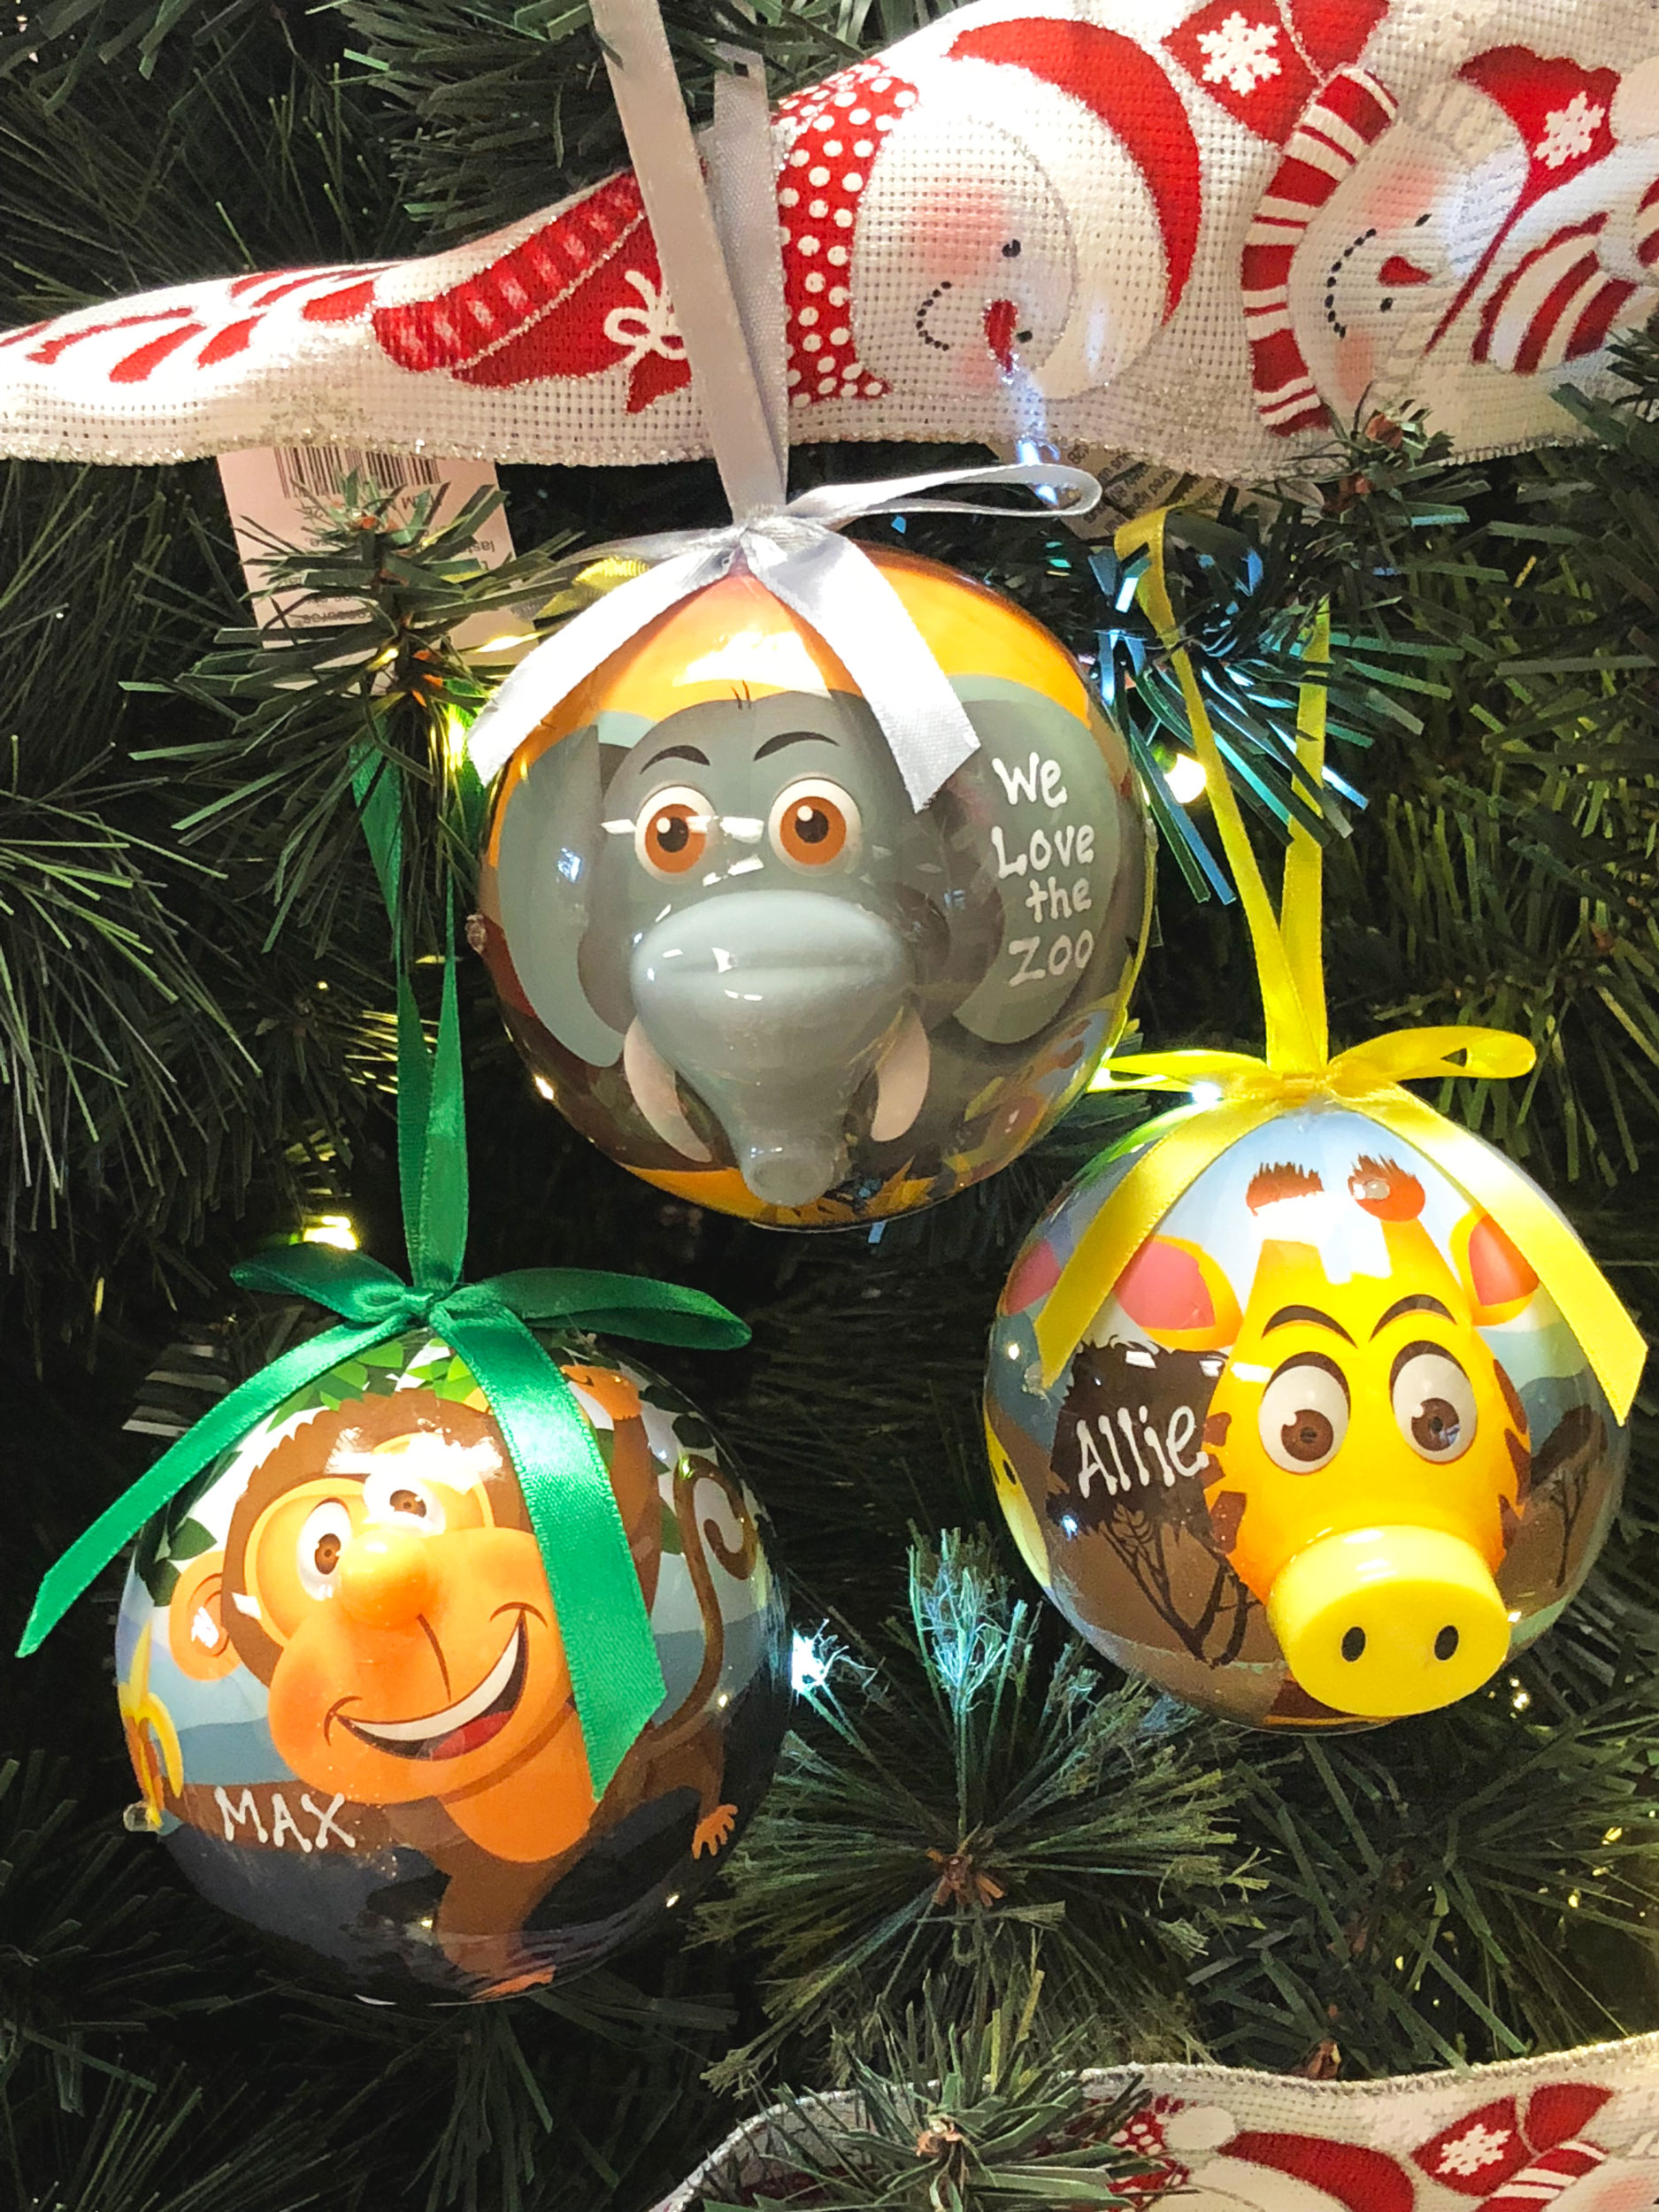 Three zoo animal ornaments on a tree with blinking noses - an elephant, giraffe and monkey. | OrnametnShop.com